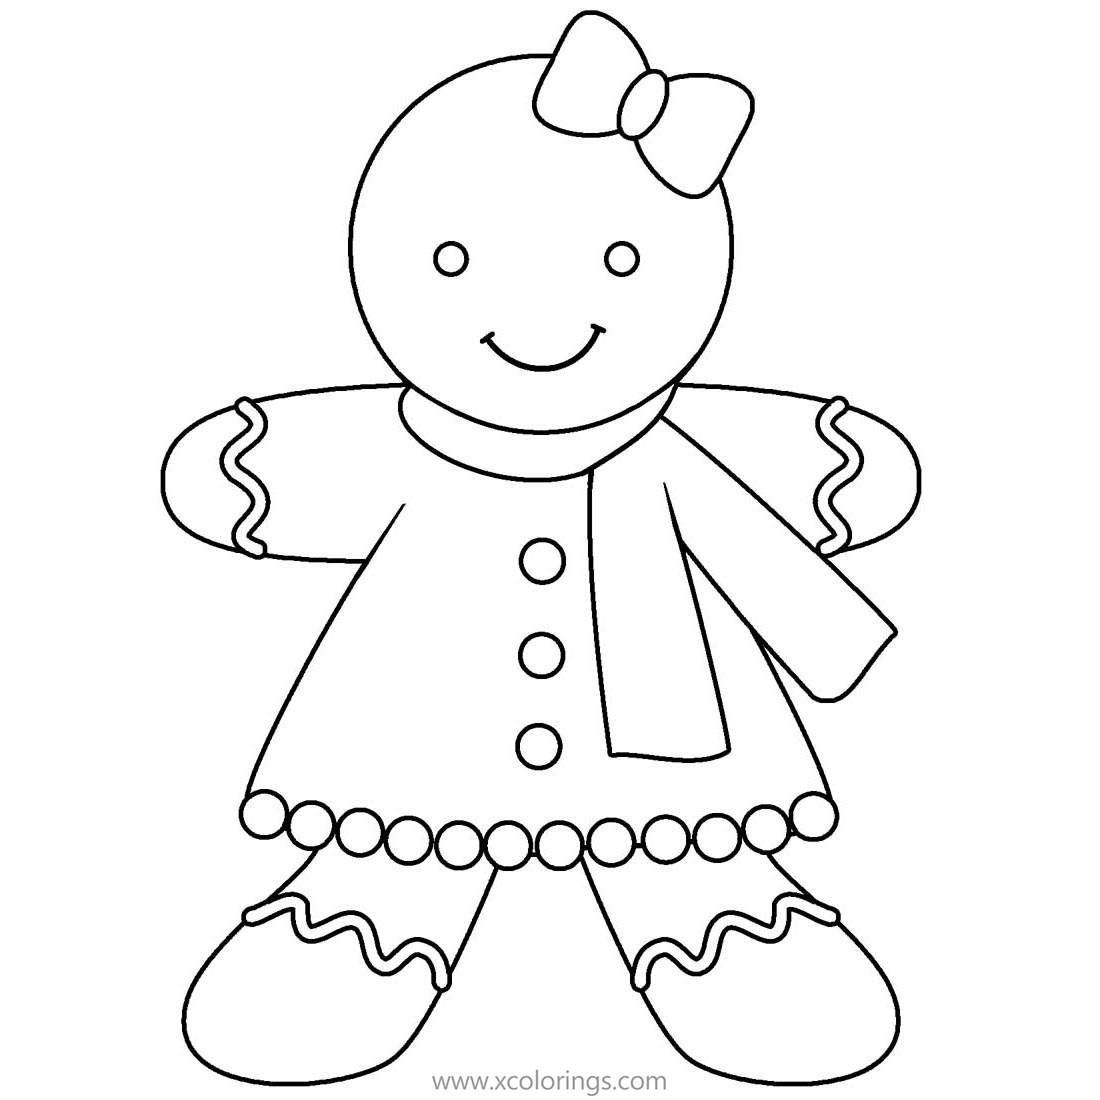 Free Gingerbread Man Coloring Pages Gingerbread Girl printable